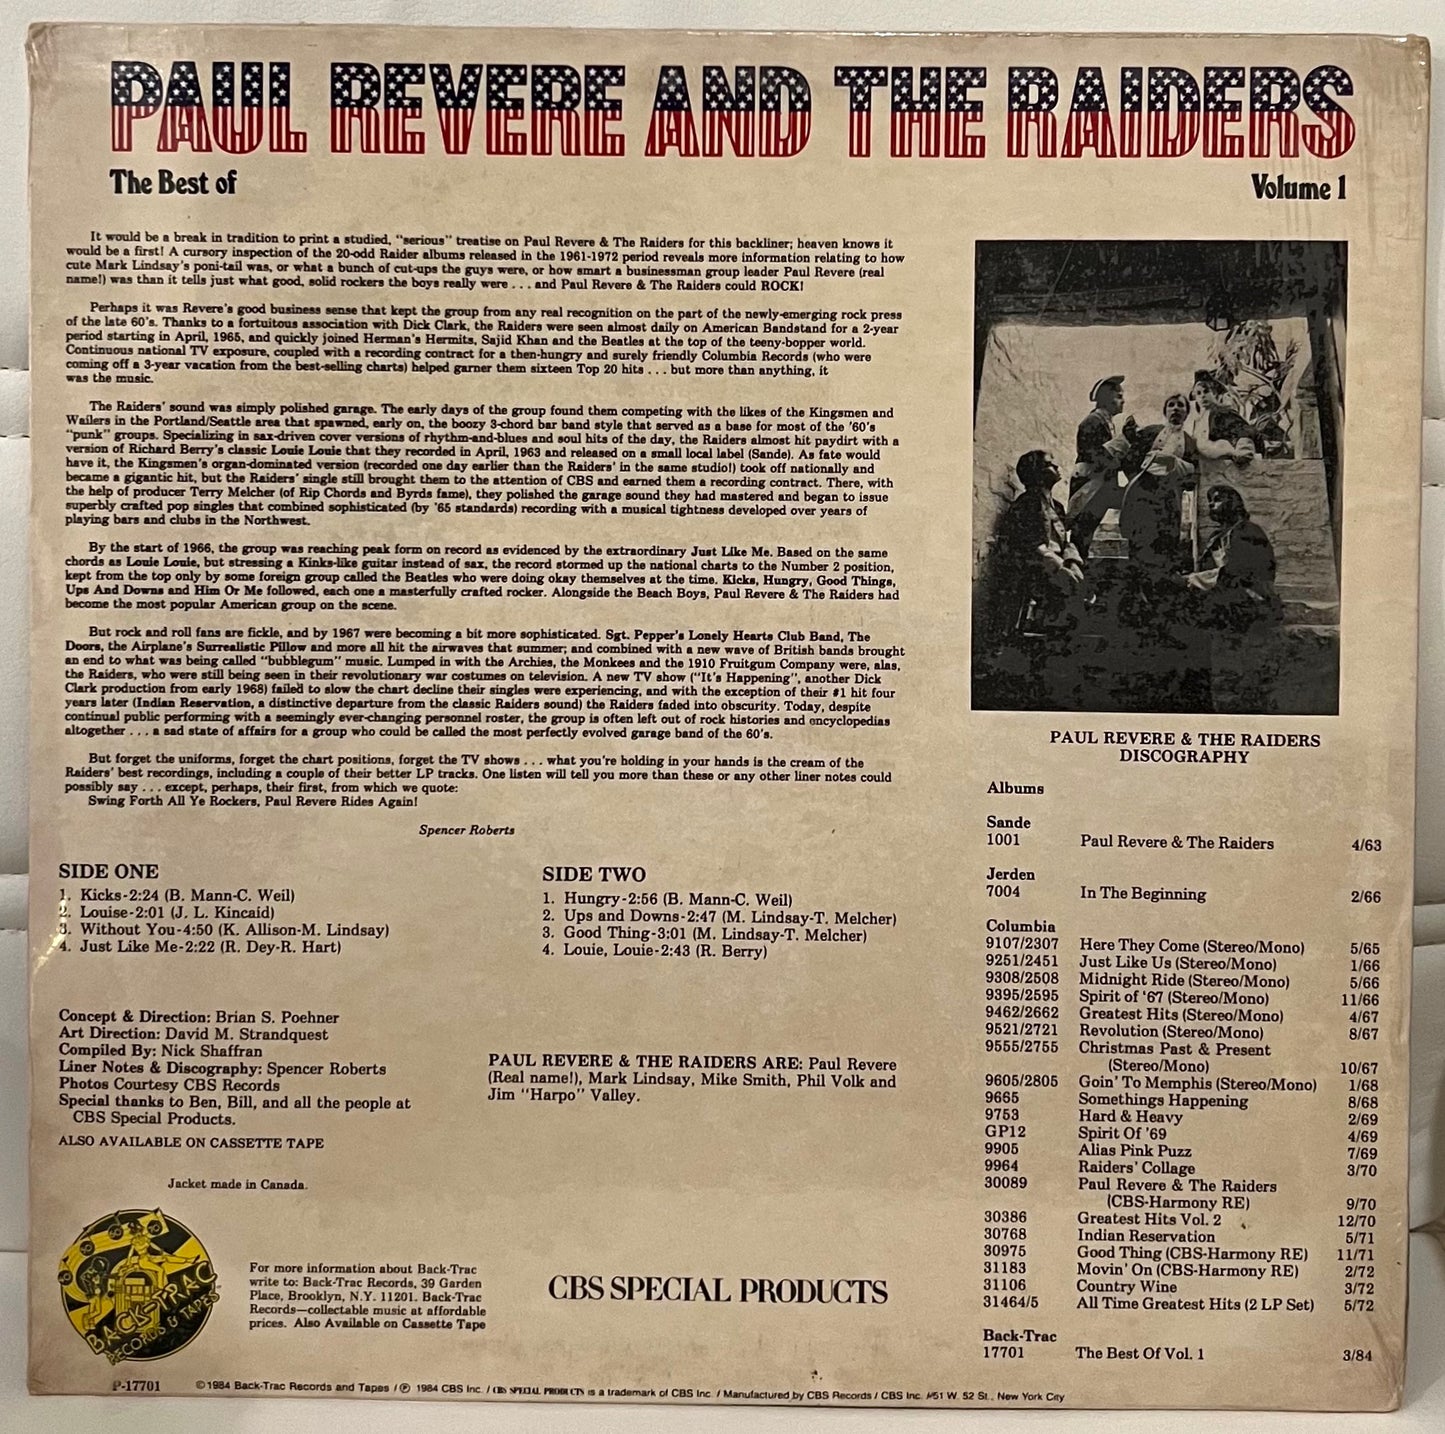 The Best of Paul Revere & The Raiders Vol 1 SEALED - Paul Revere & The Raiders - Personally Autographed to YOU